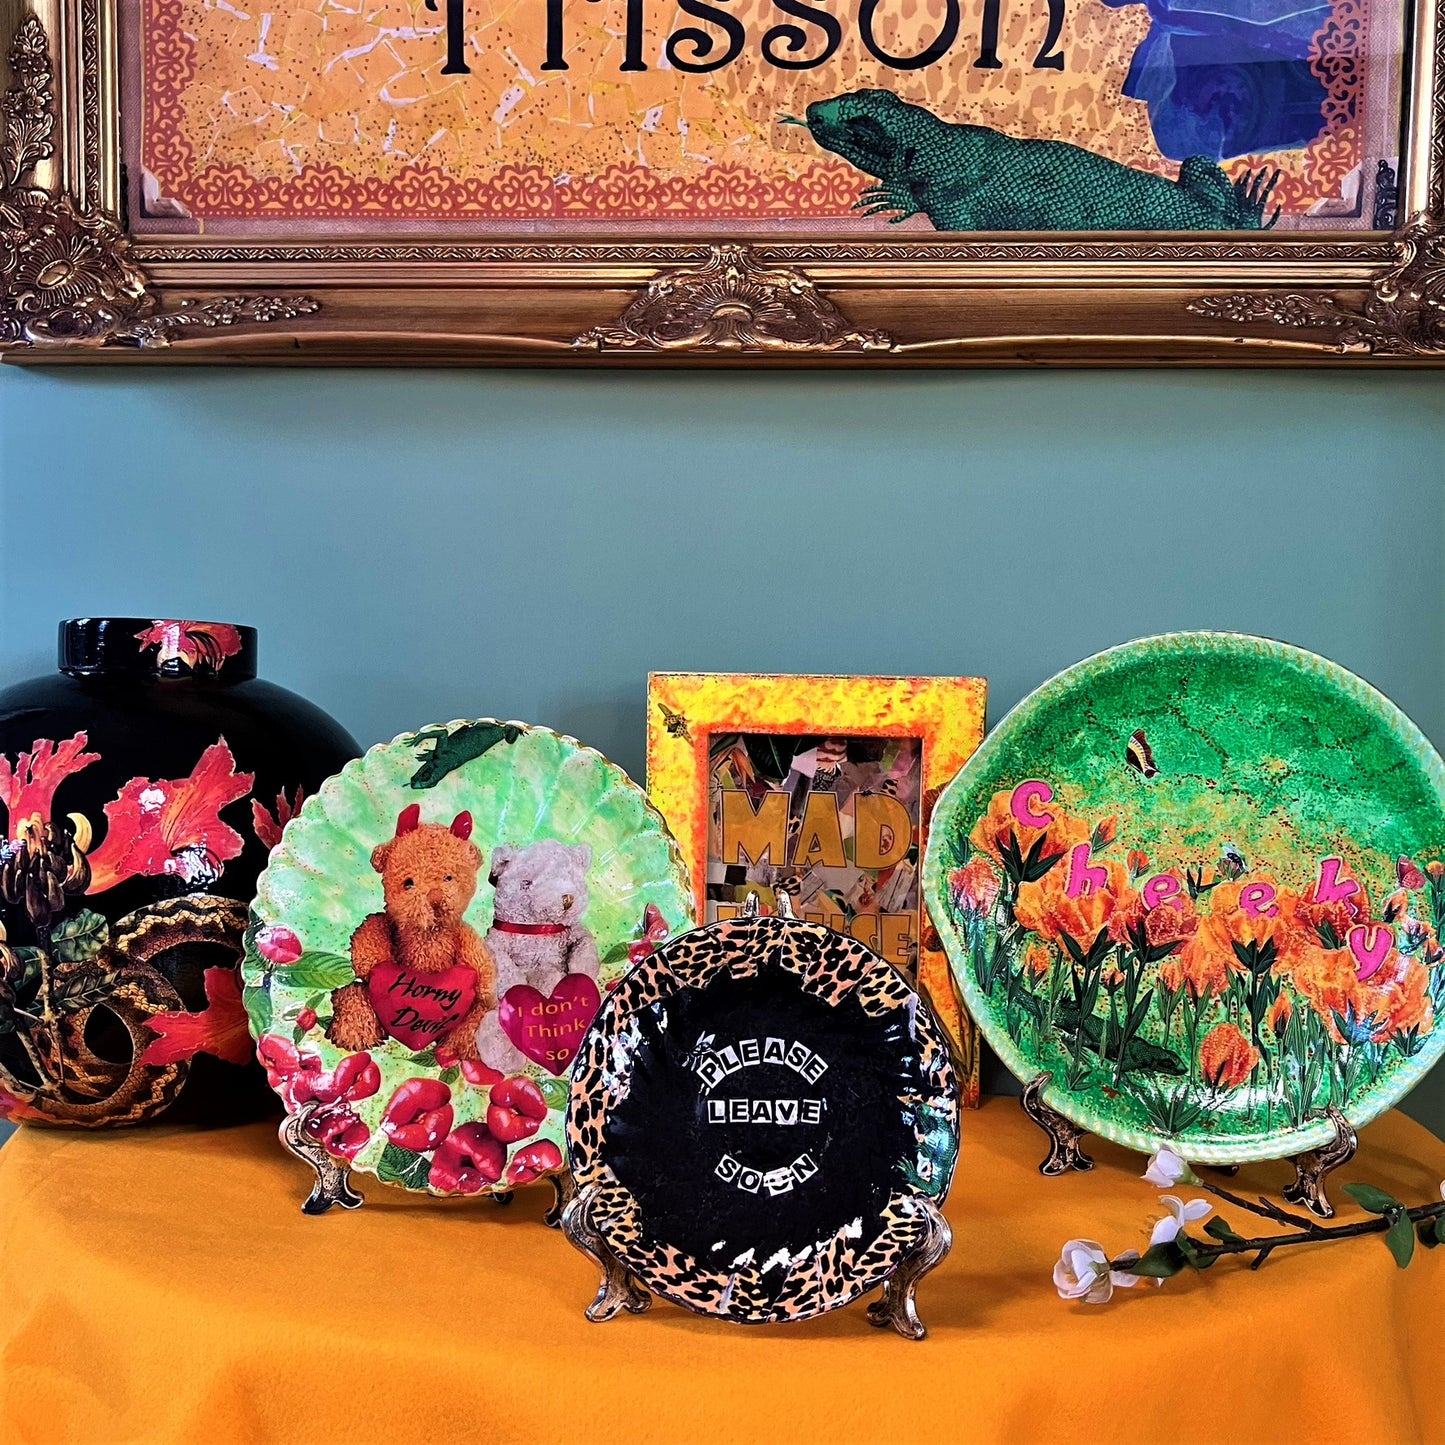 "Cheeky" Wall Plate by House of Frisson, featuring a collage with letters coming out of flowers forming the word "cheeky", and a lizard, on a green background. Plate on a plate stand resting on a table with other plates.